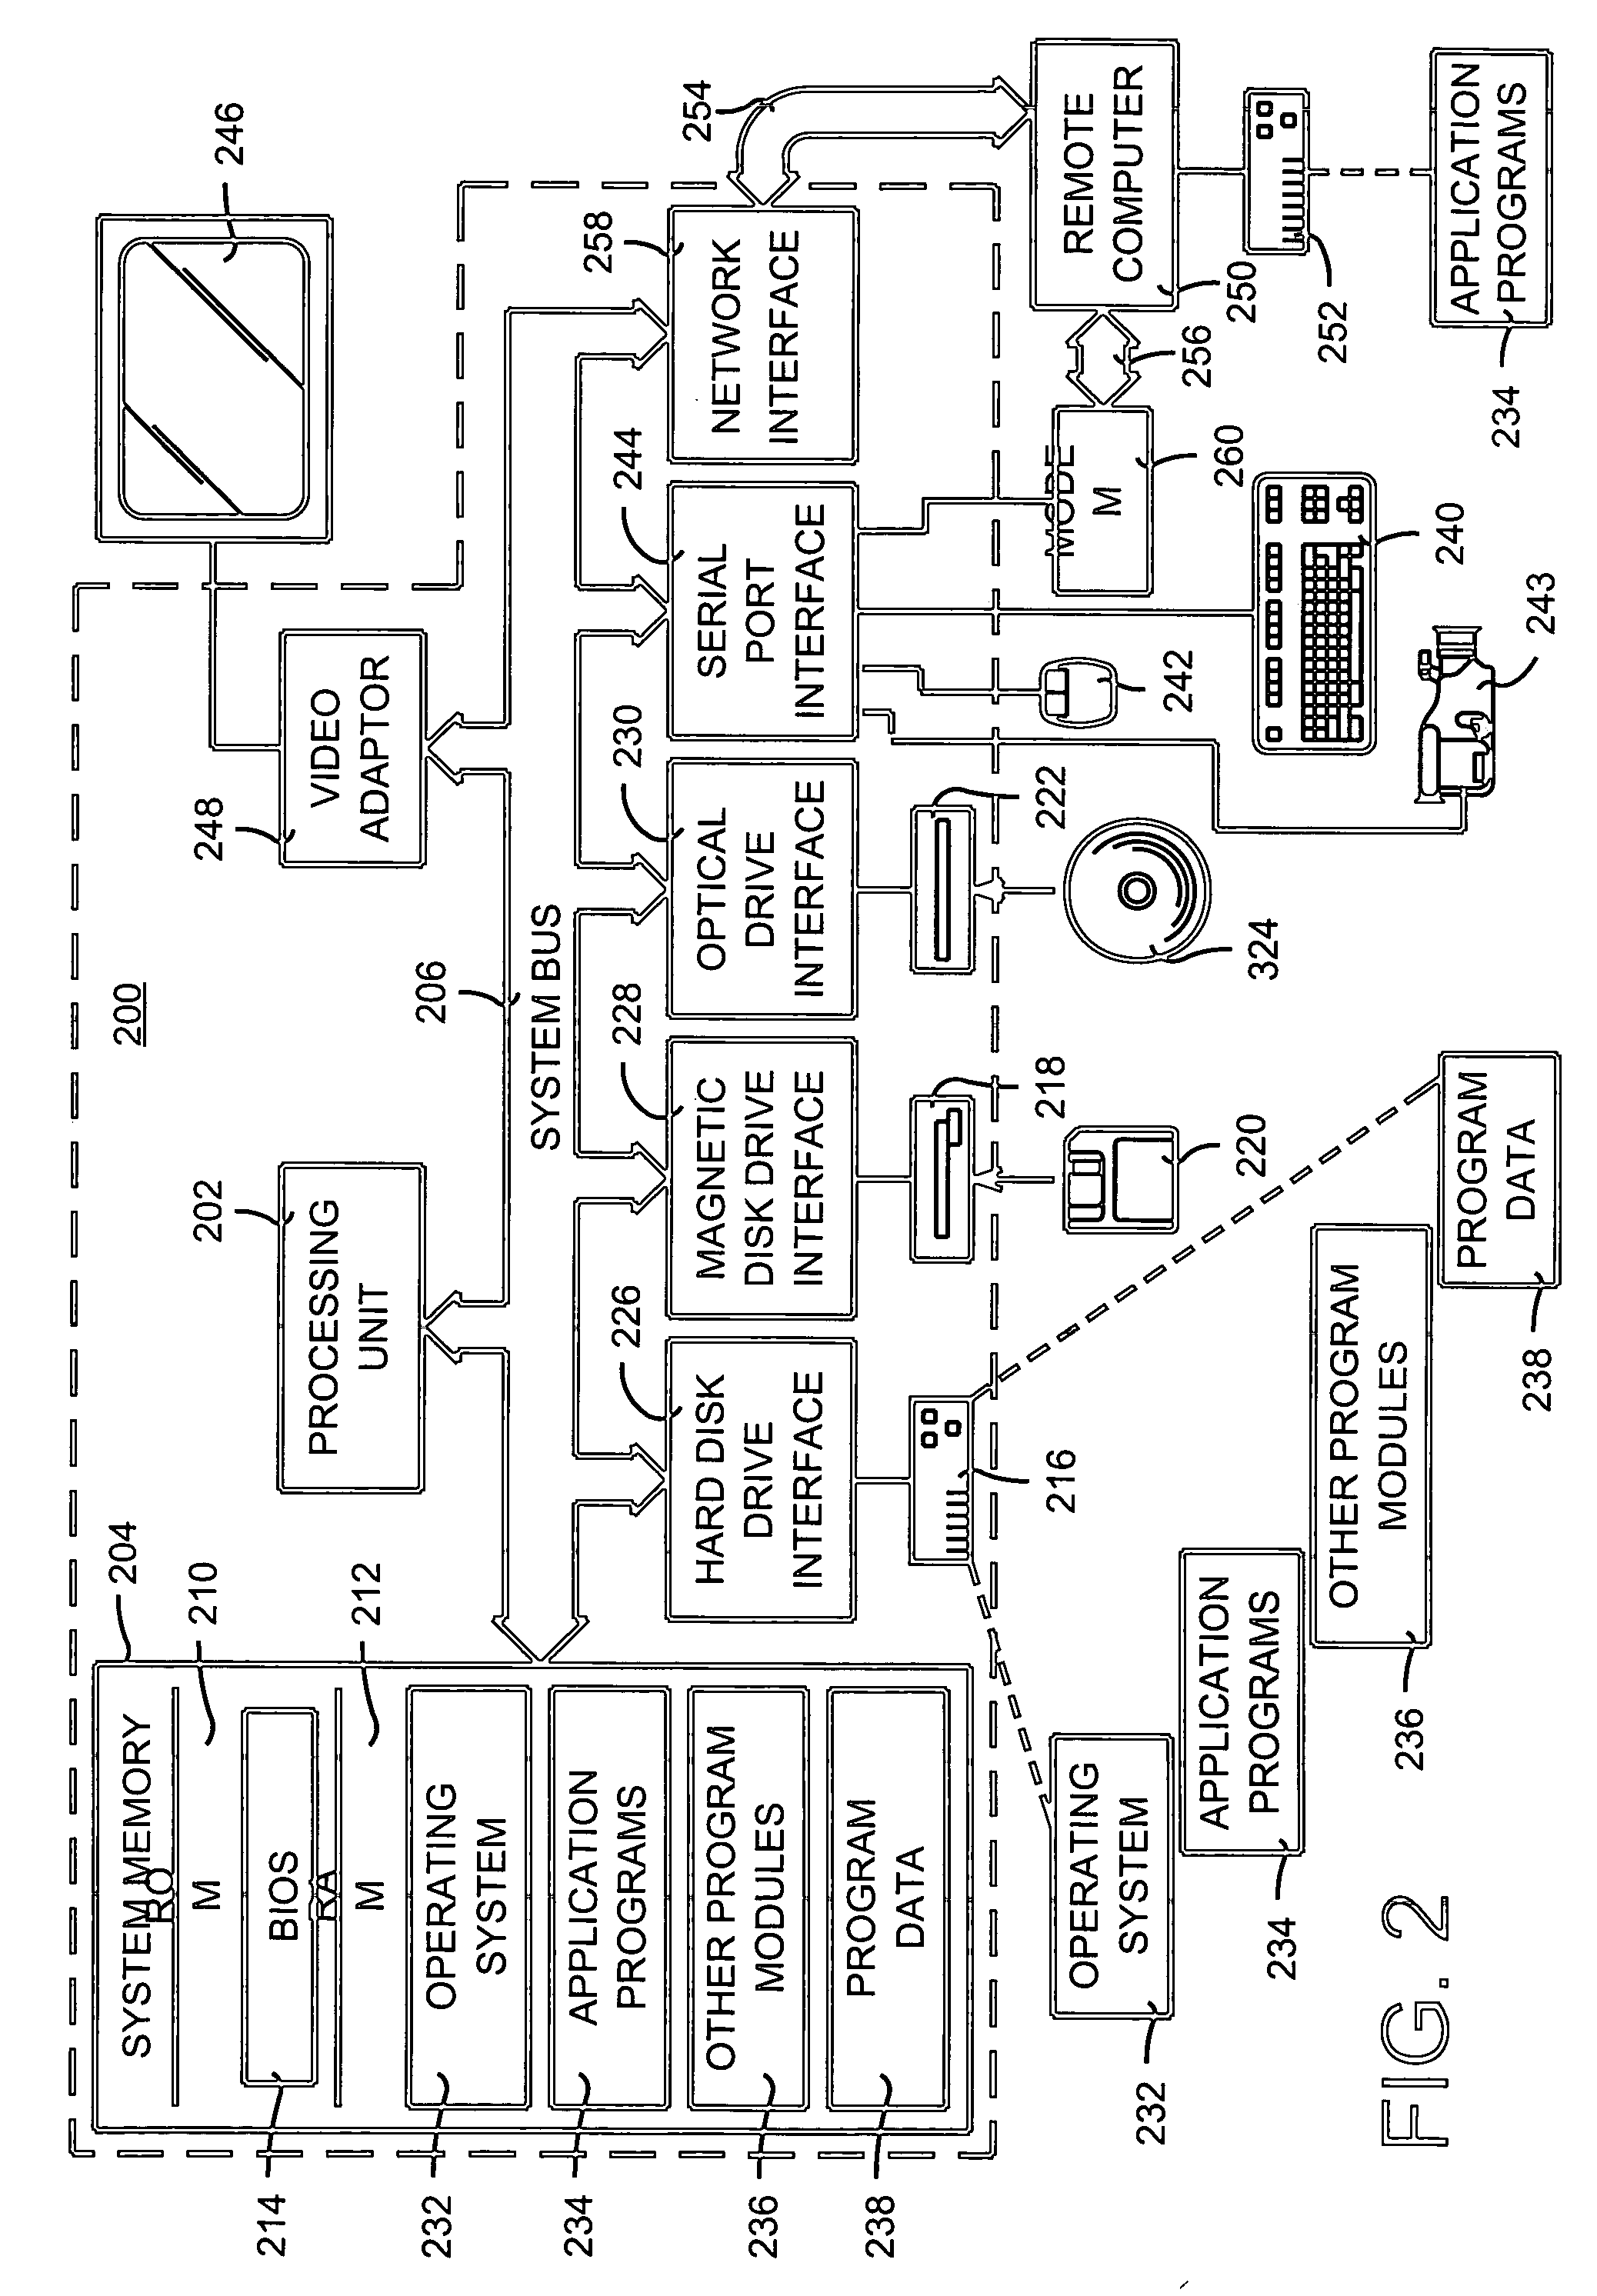 Real-time wide-angle image correction system and method for computer image viewing